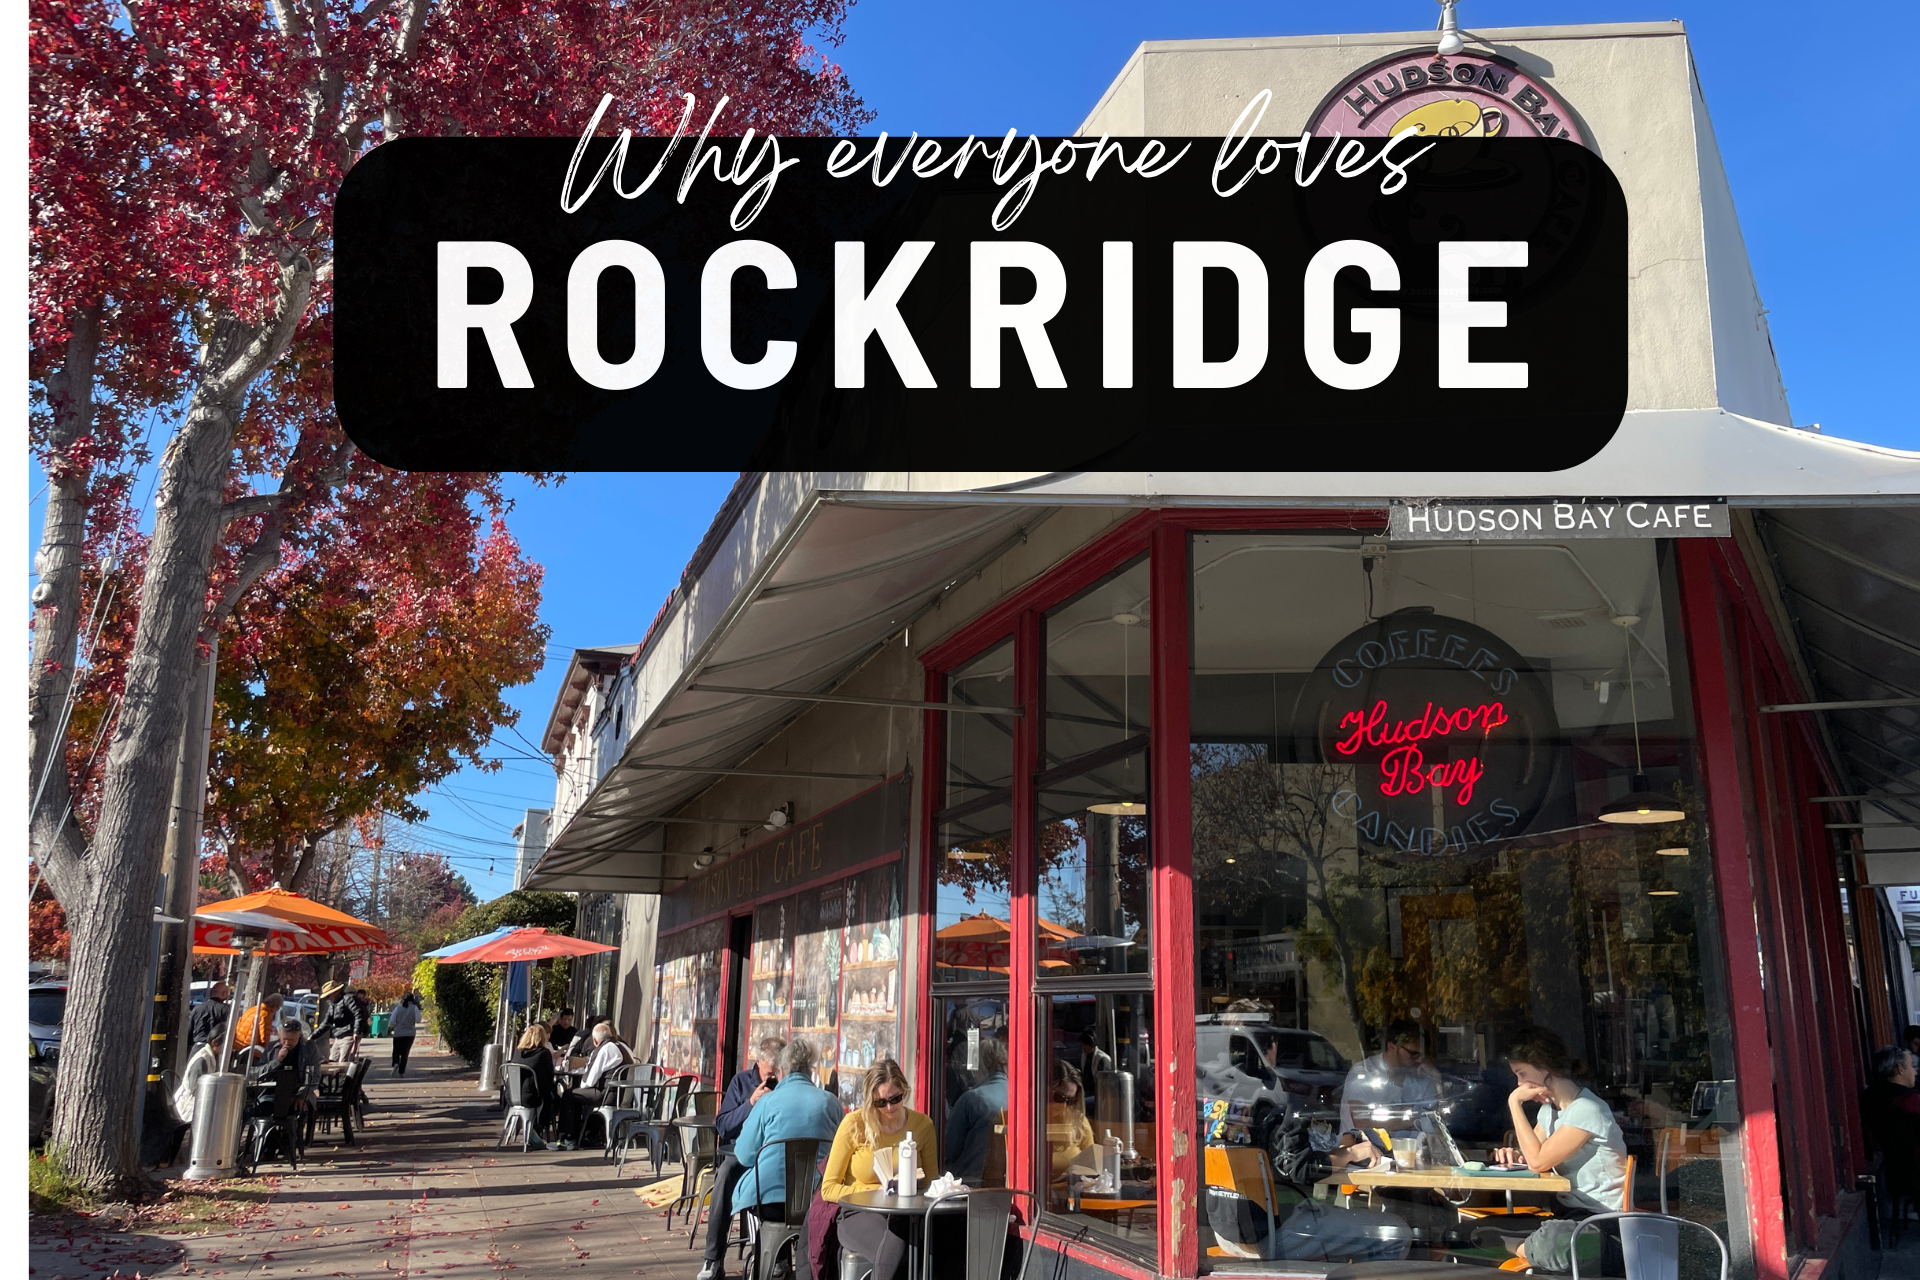 Rockridge Oakland is a great place to live in the East Bay